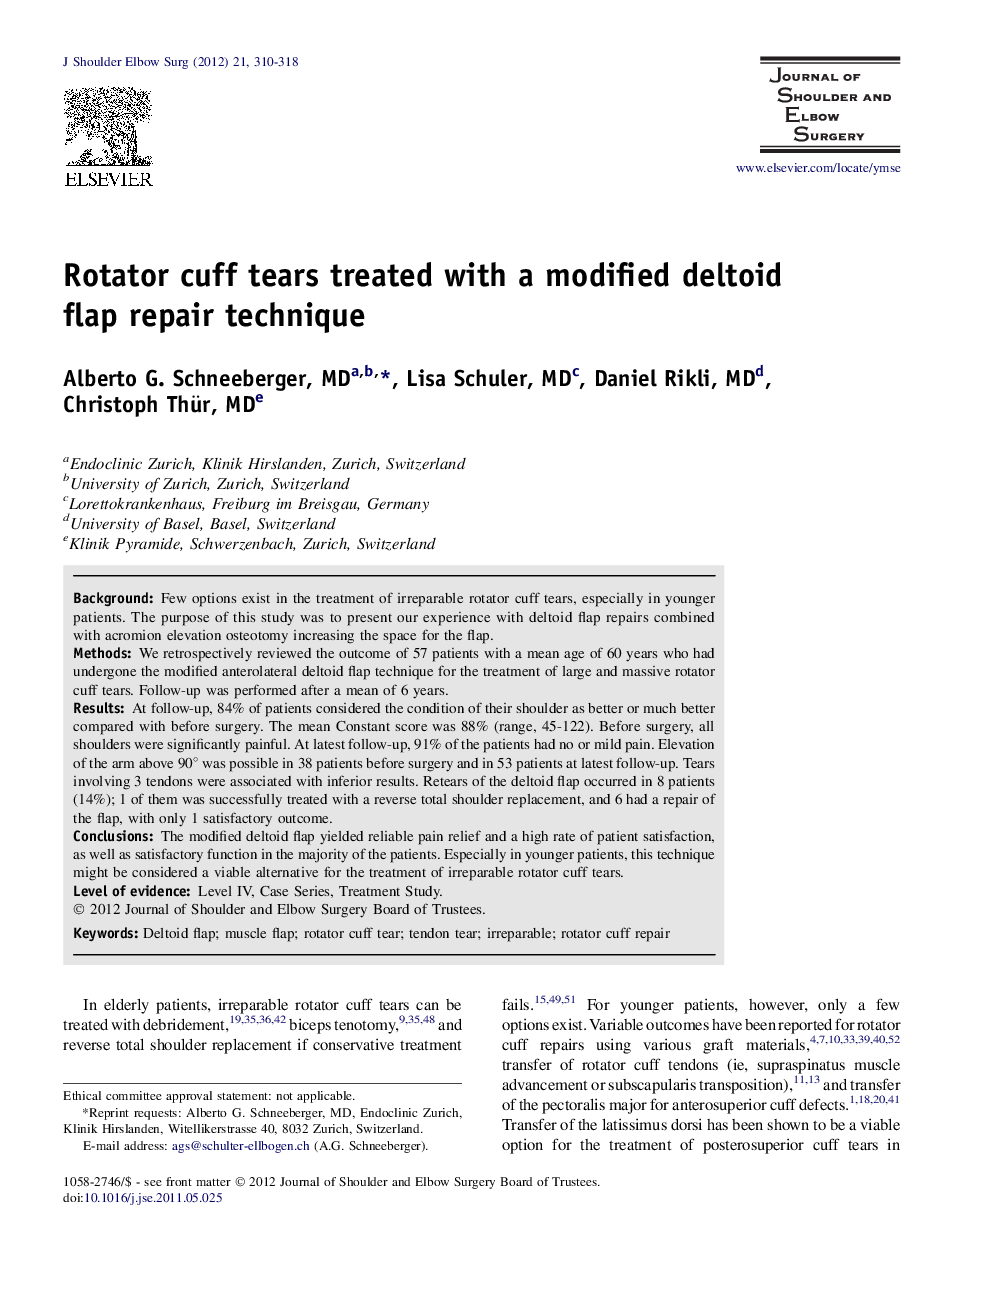 Rotator cuff tears treated with a modified deltoid flap repair technique 